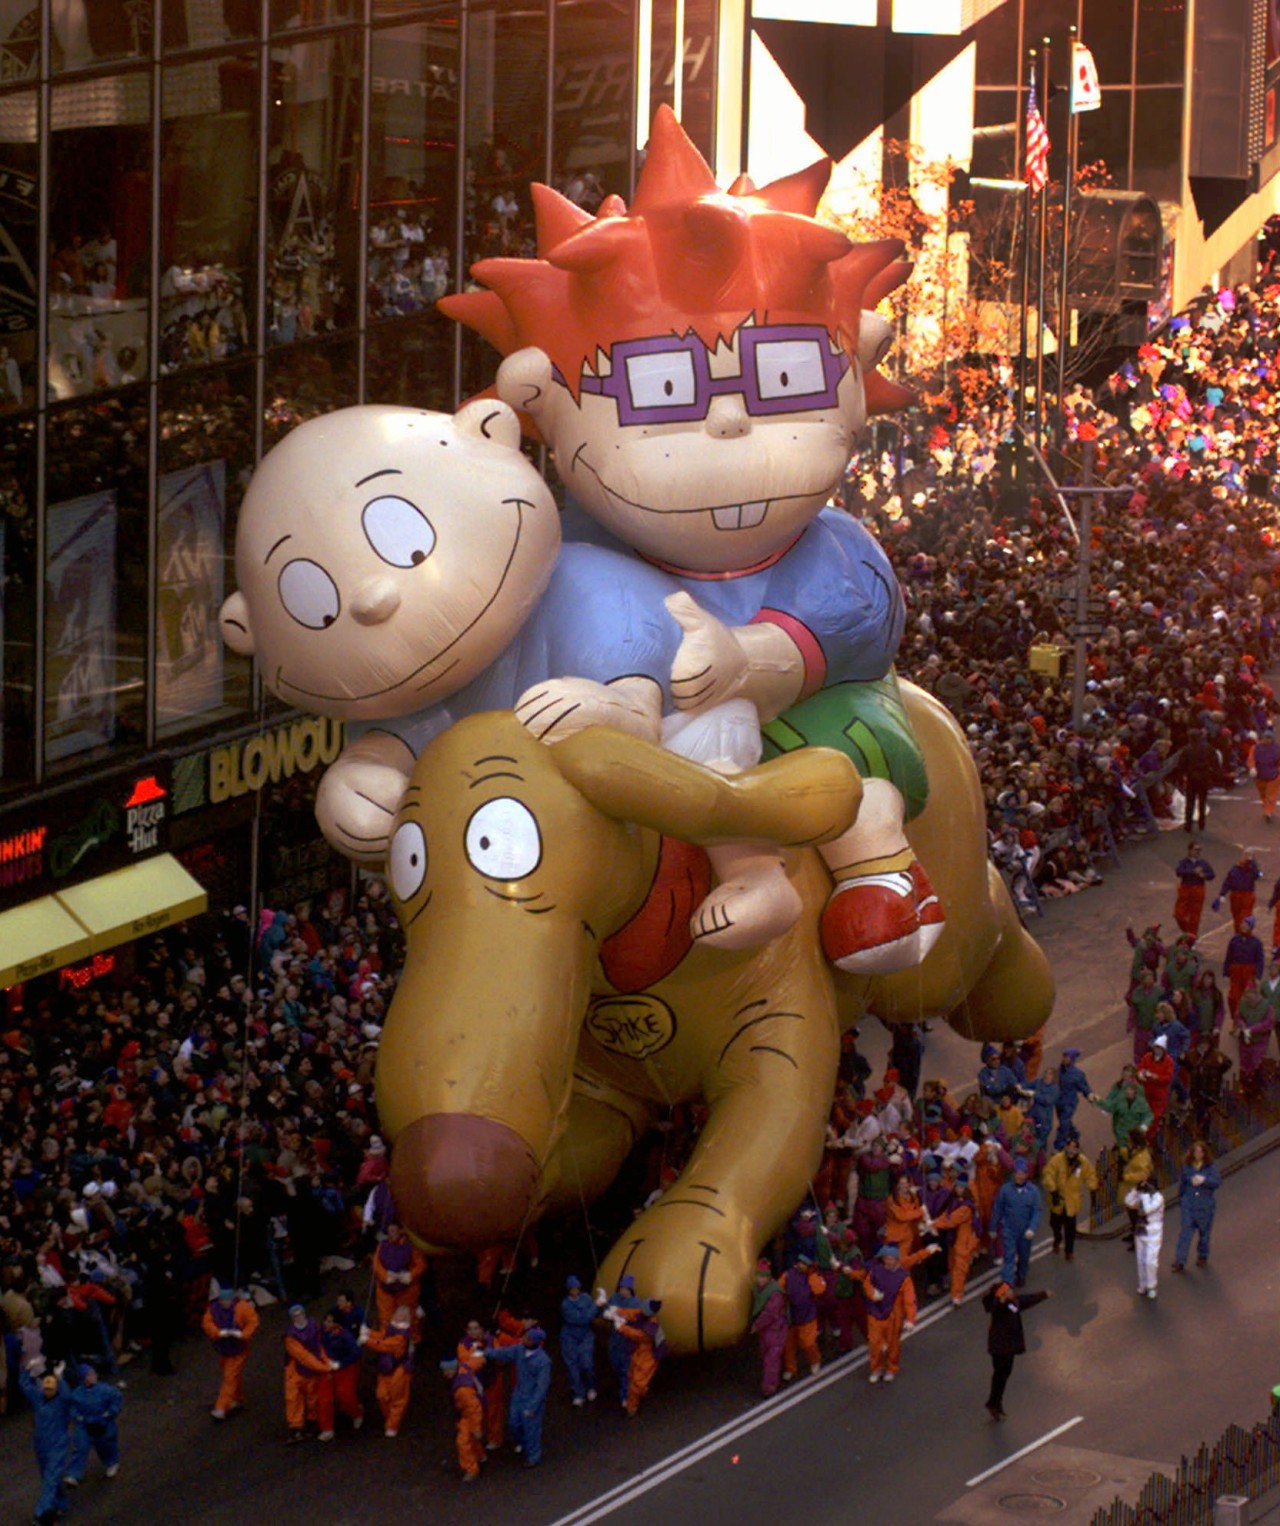 The Rugrats balloon floats through New York's Times Square during the 1997 parade. (Adam Nadel/AP)